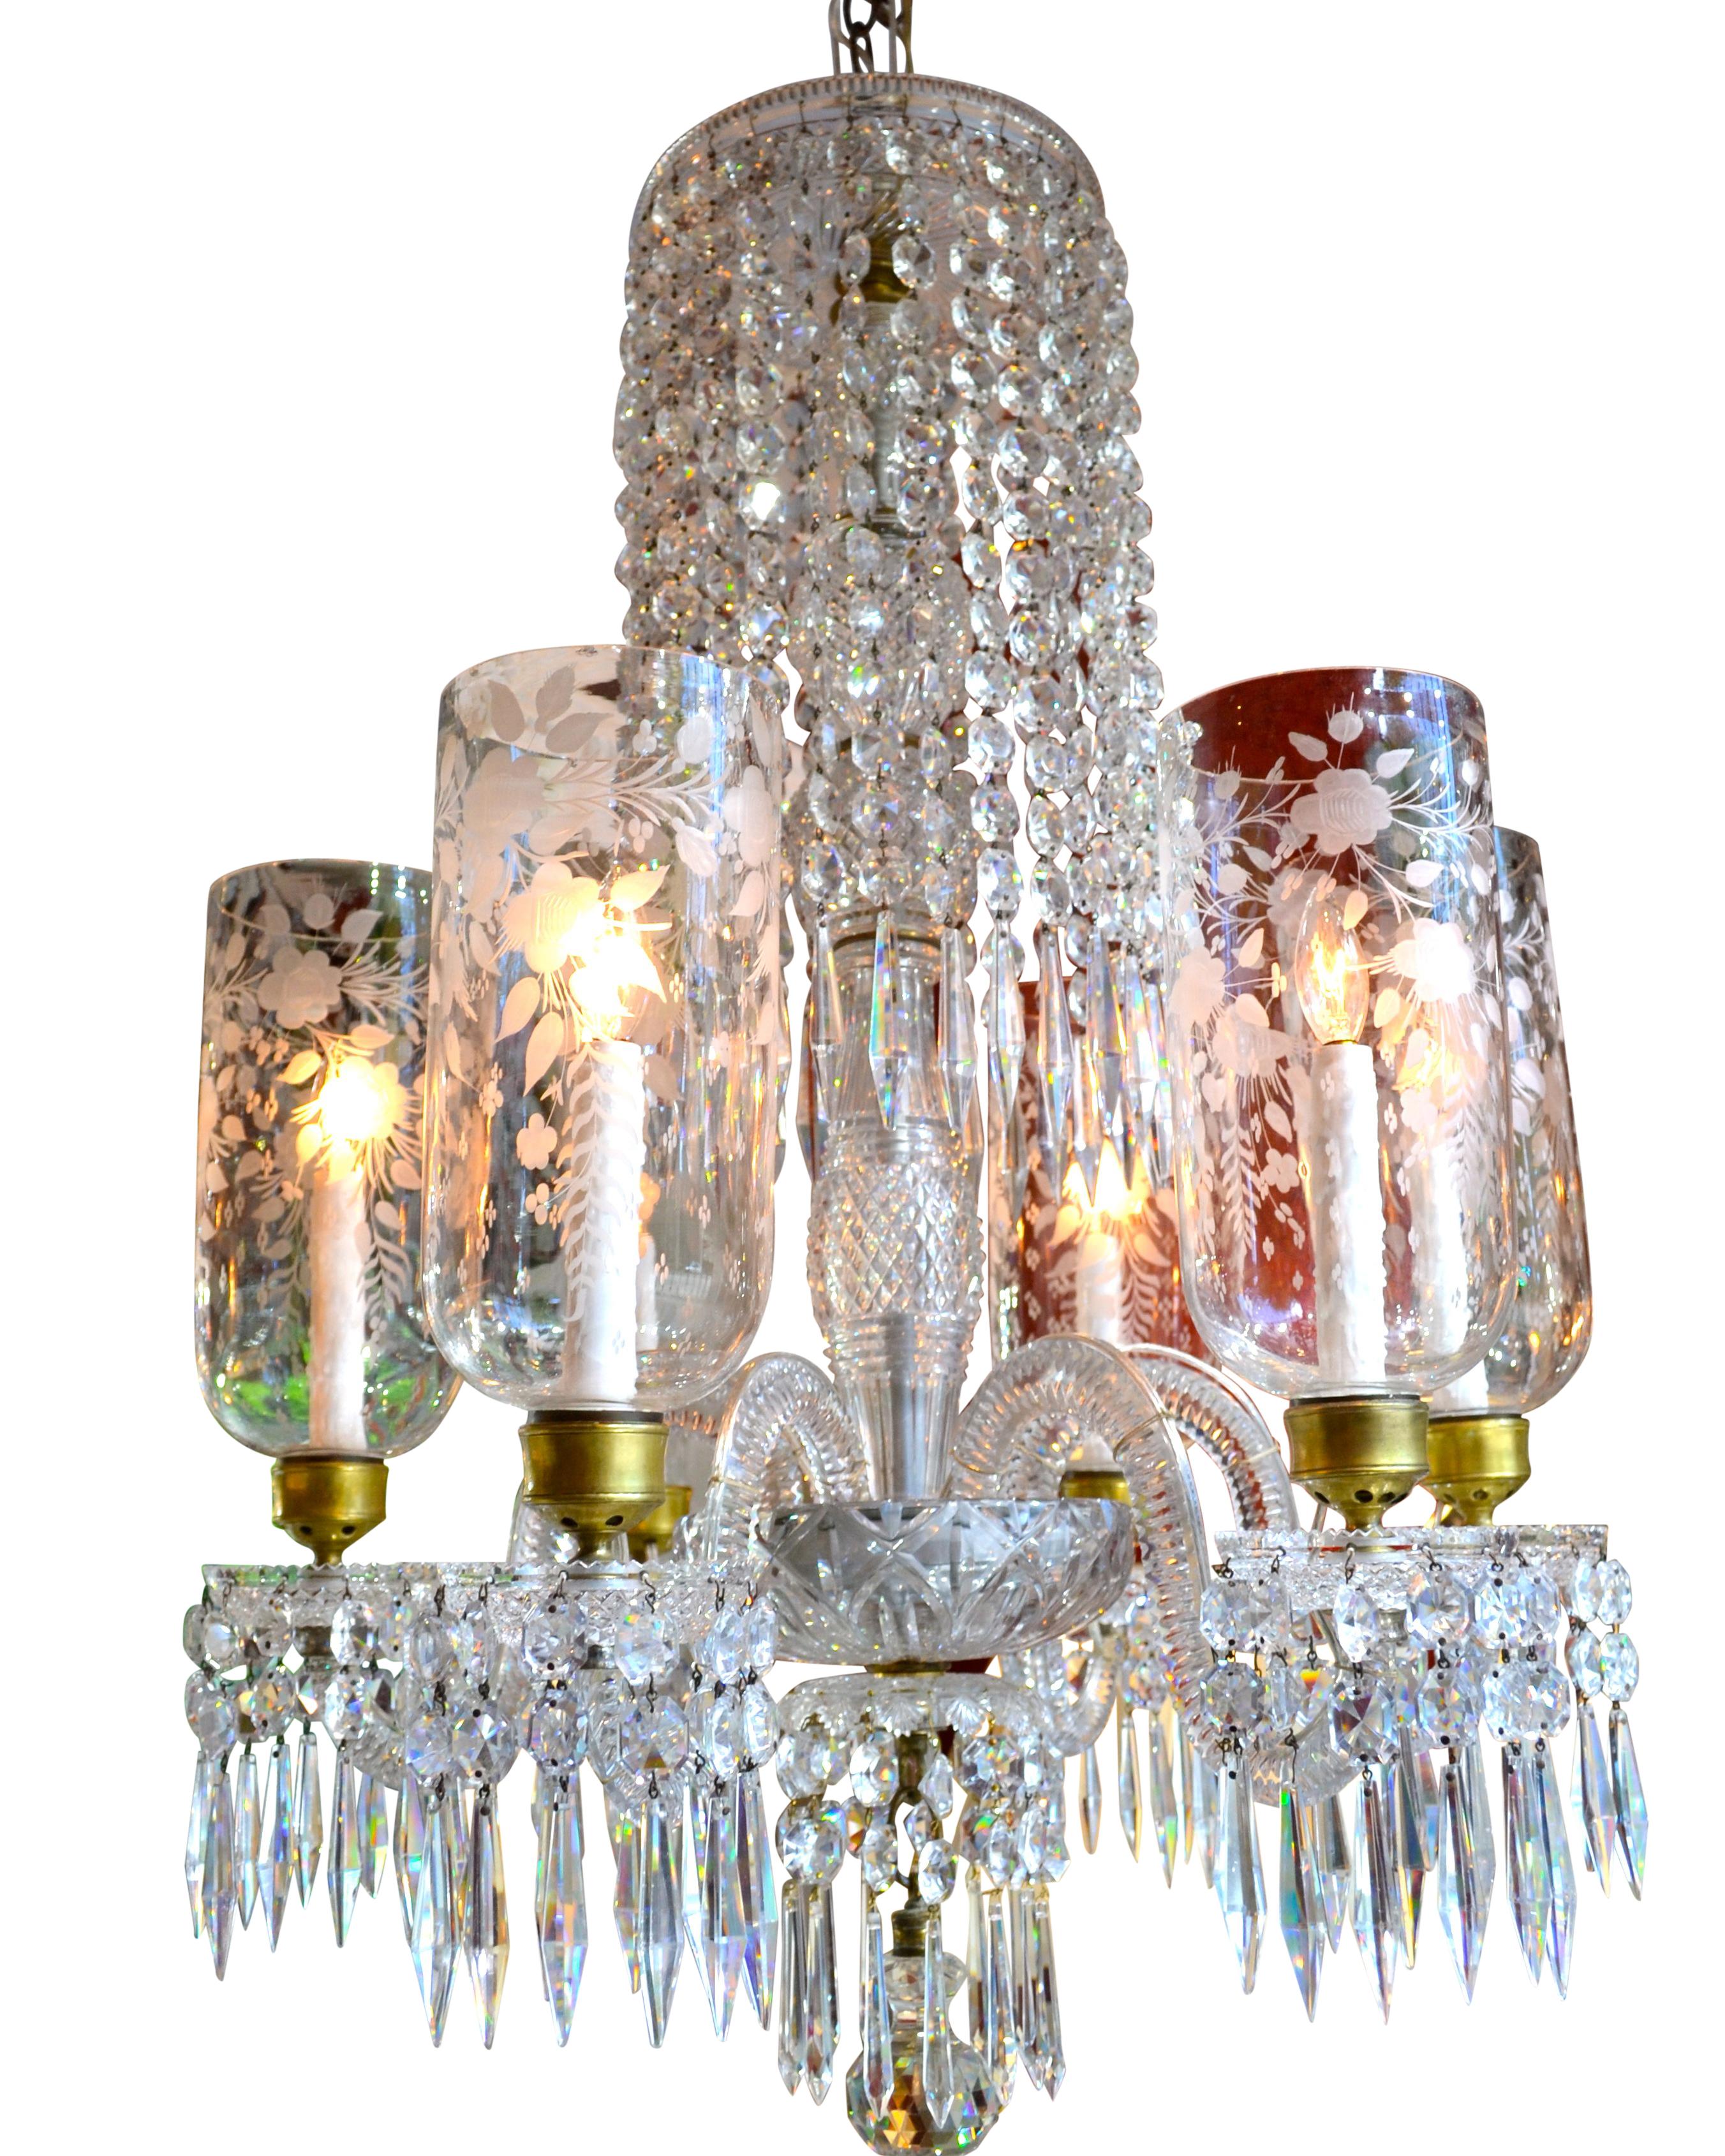 A 19th century English cut crystal chandelier of the highest quality, likely made by the firm of either Osler of Birmingham, Blades or Waterford. Every piece of this chandelier including the components of the central stem are heavily cut and